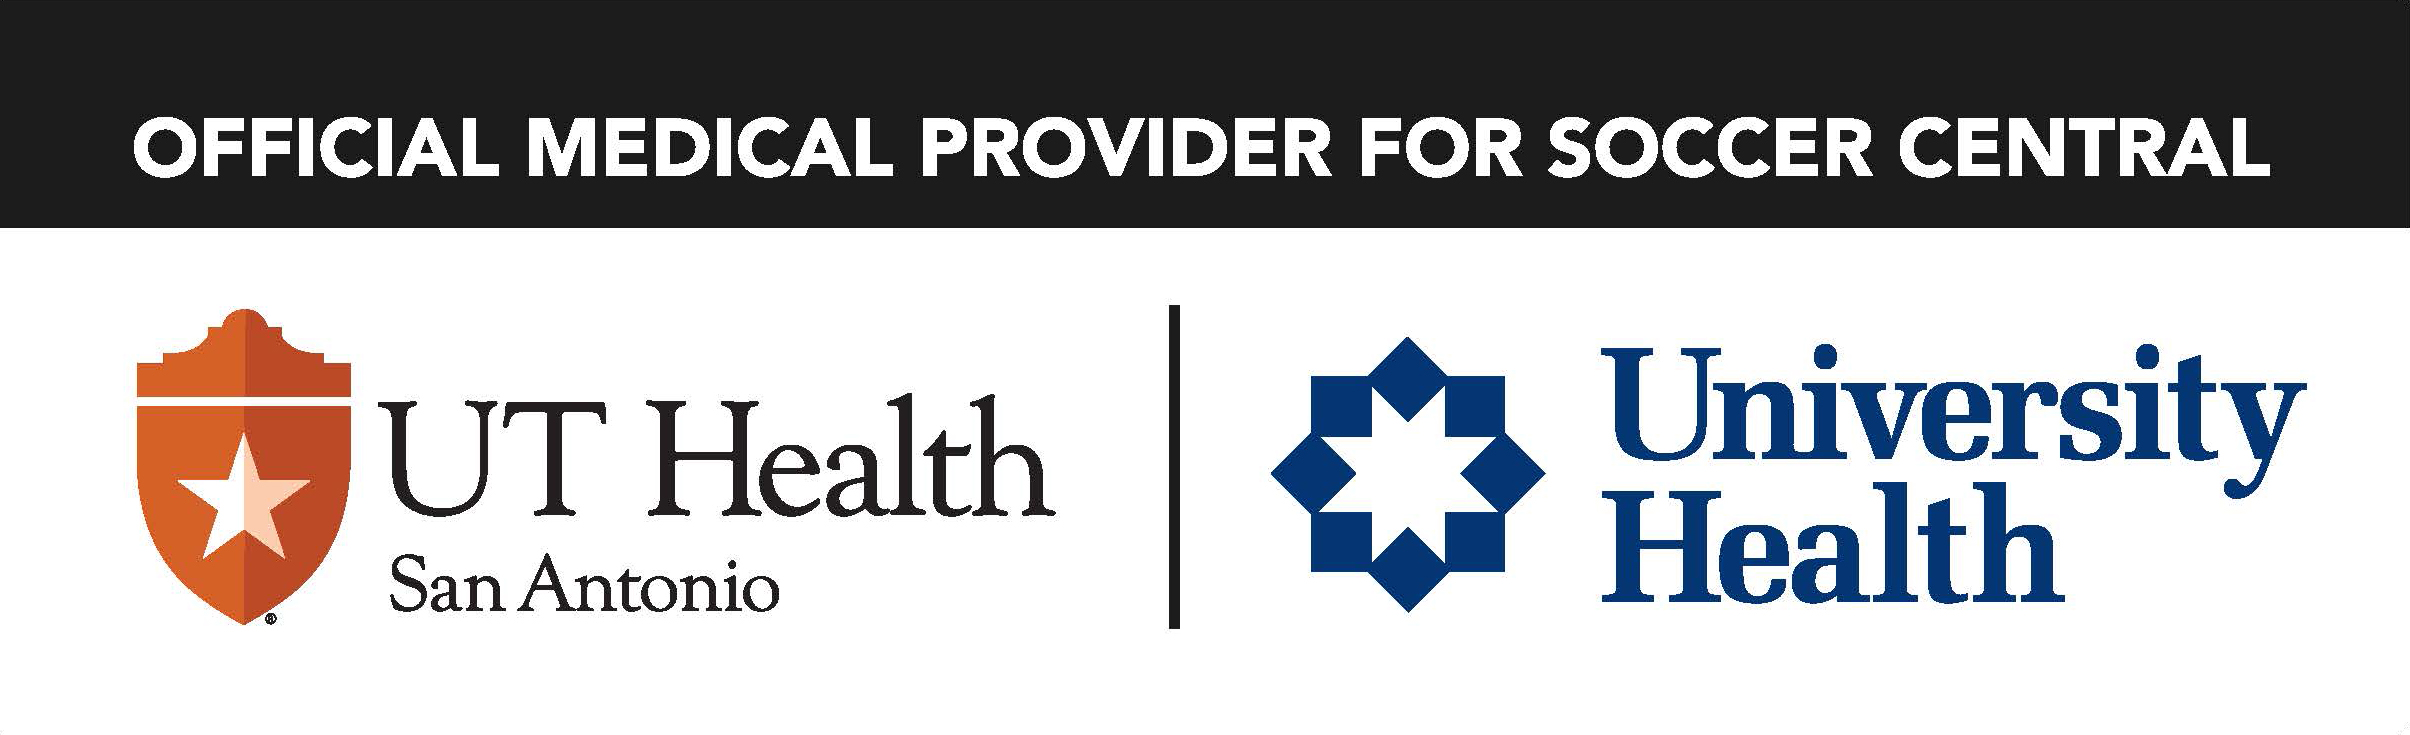 UT Health San Antonio and University Health | Official Medical Provider for Soccer Central